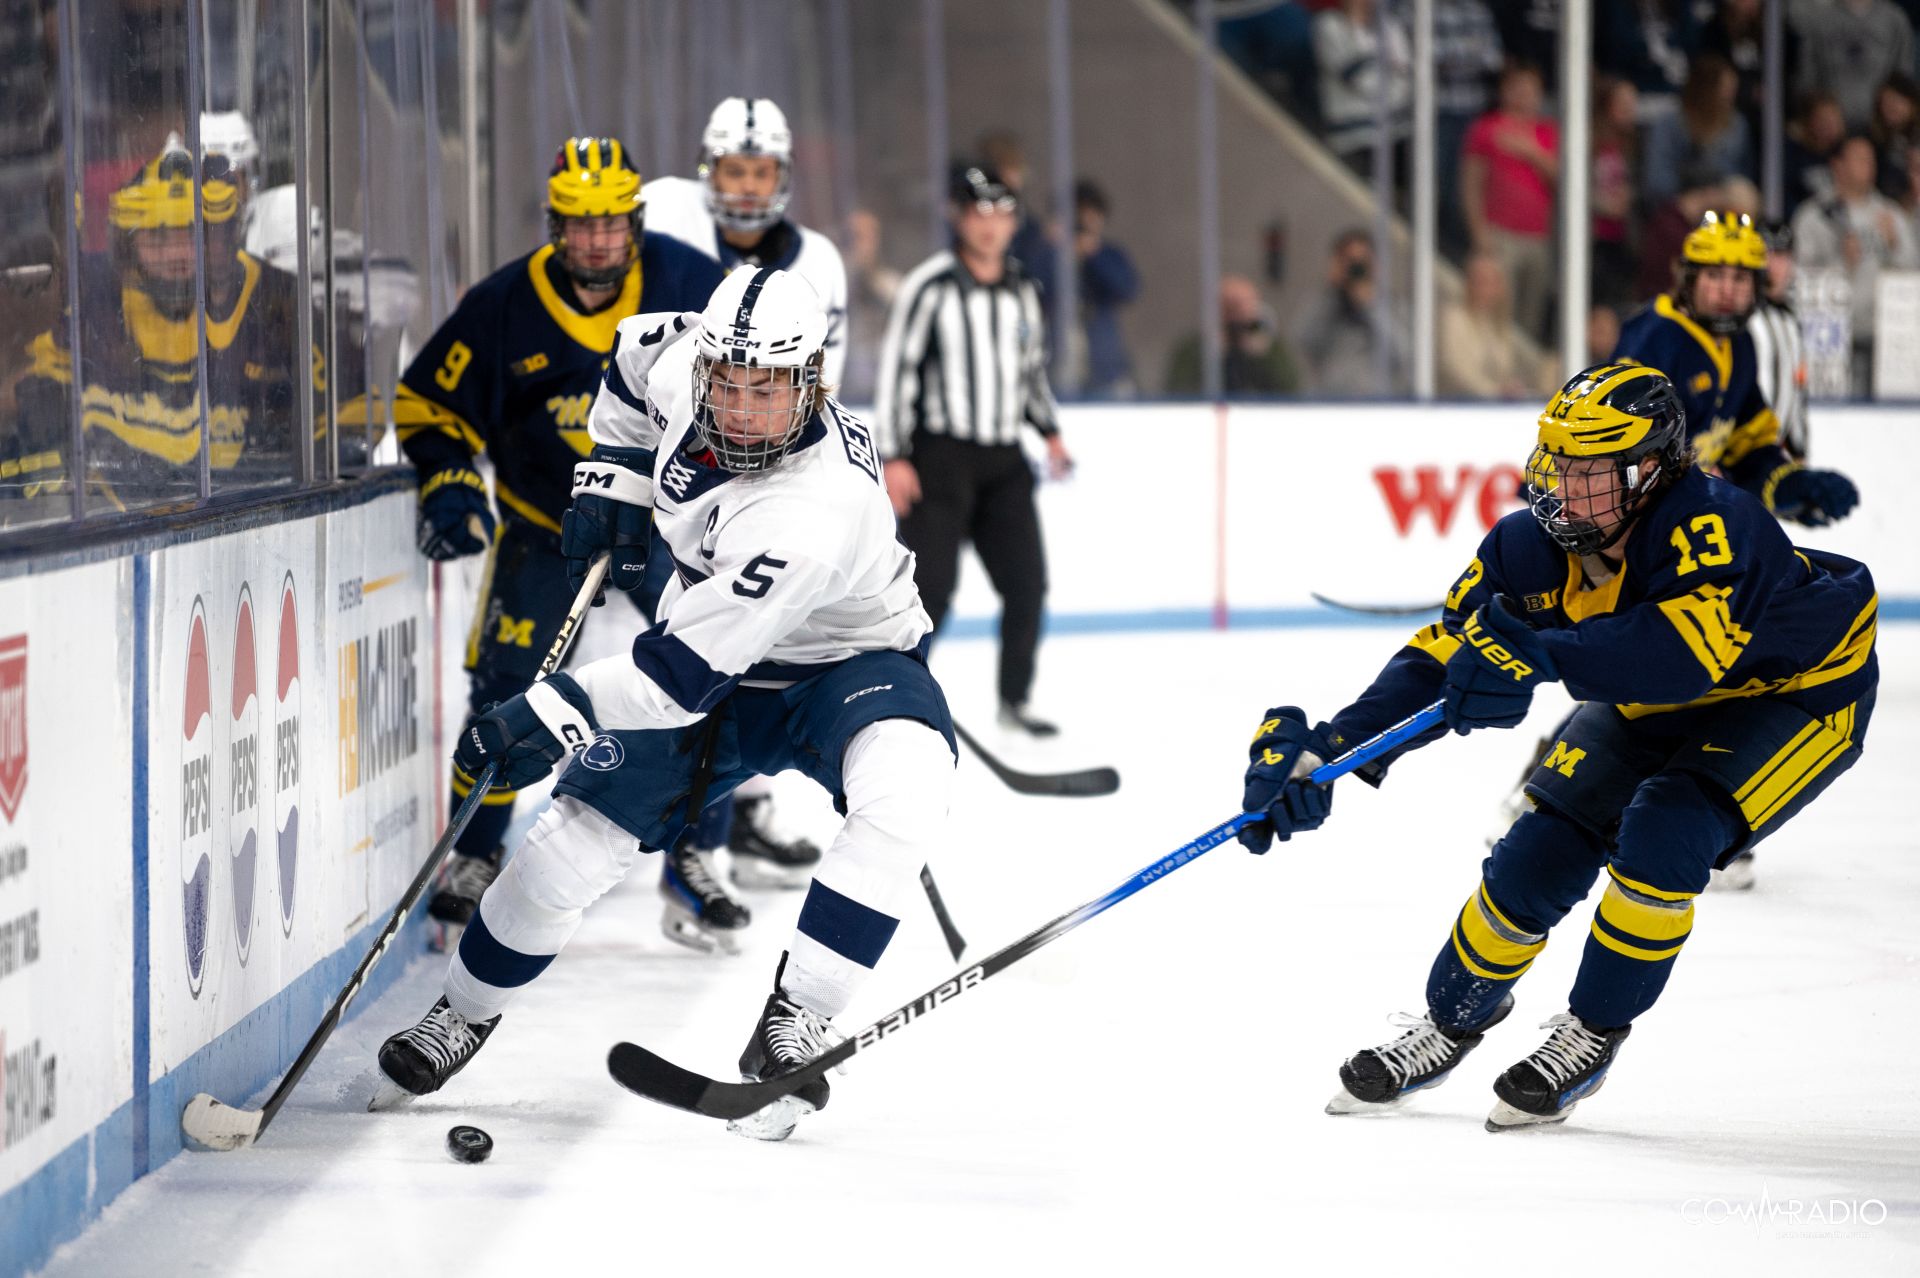 Christian Berger playing against Michigan